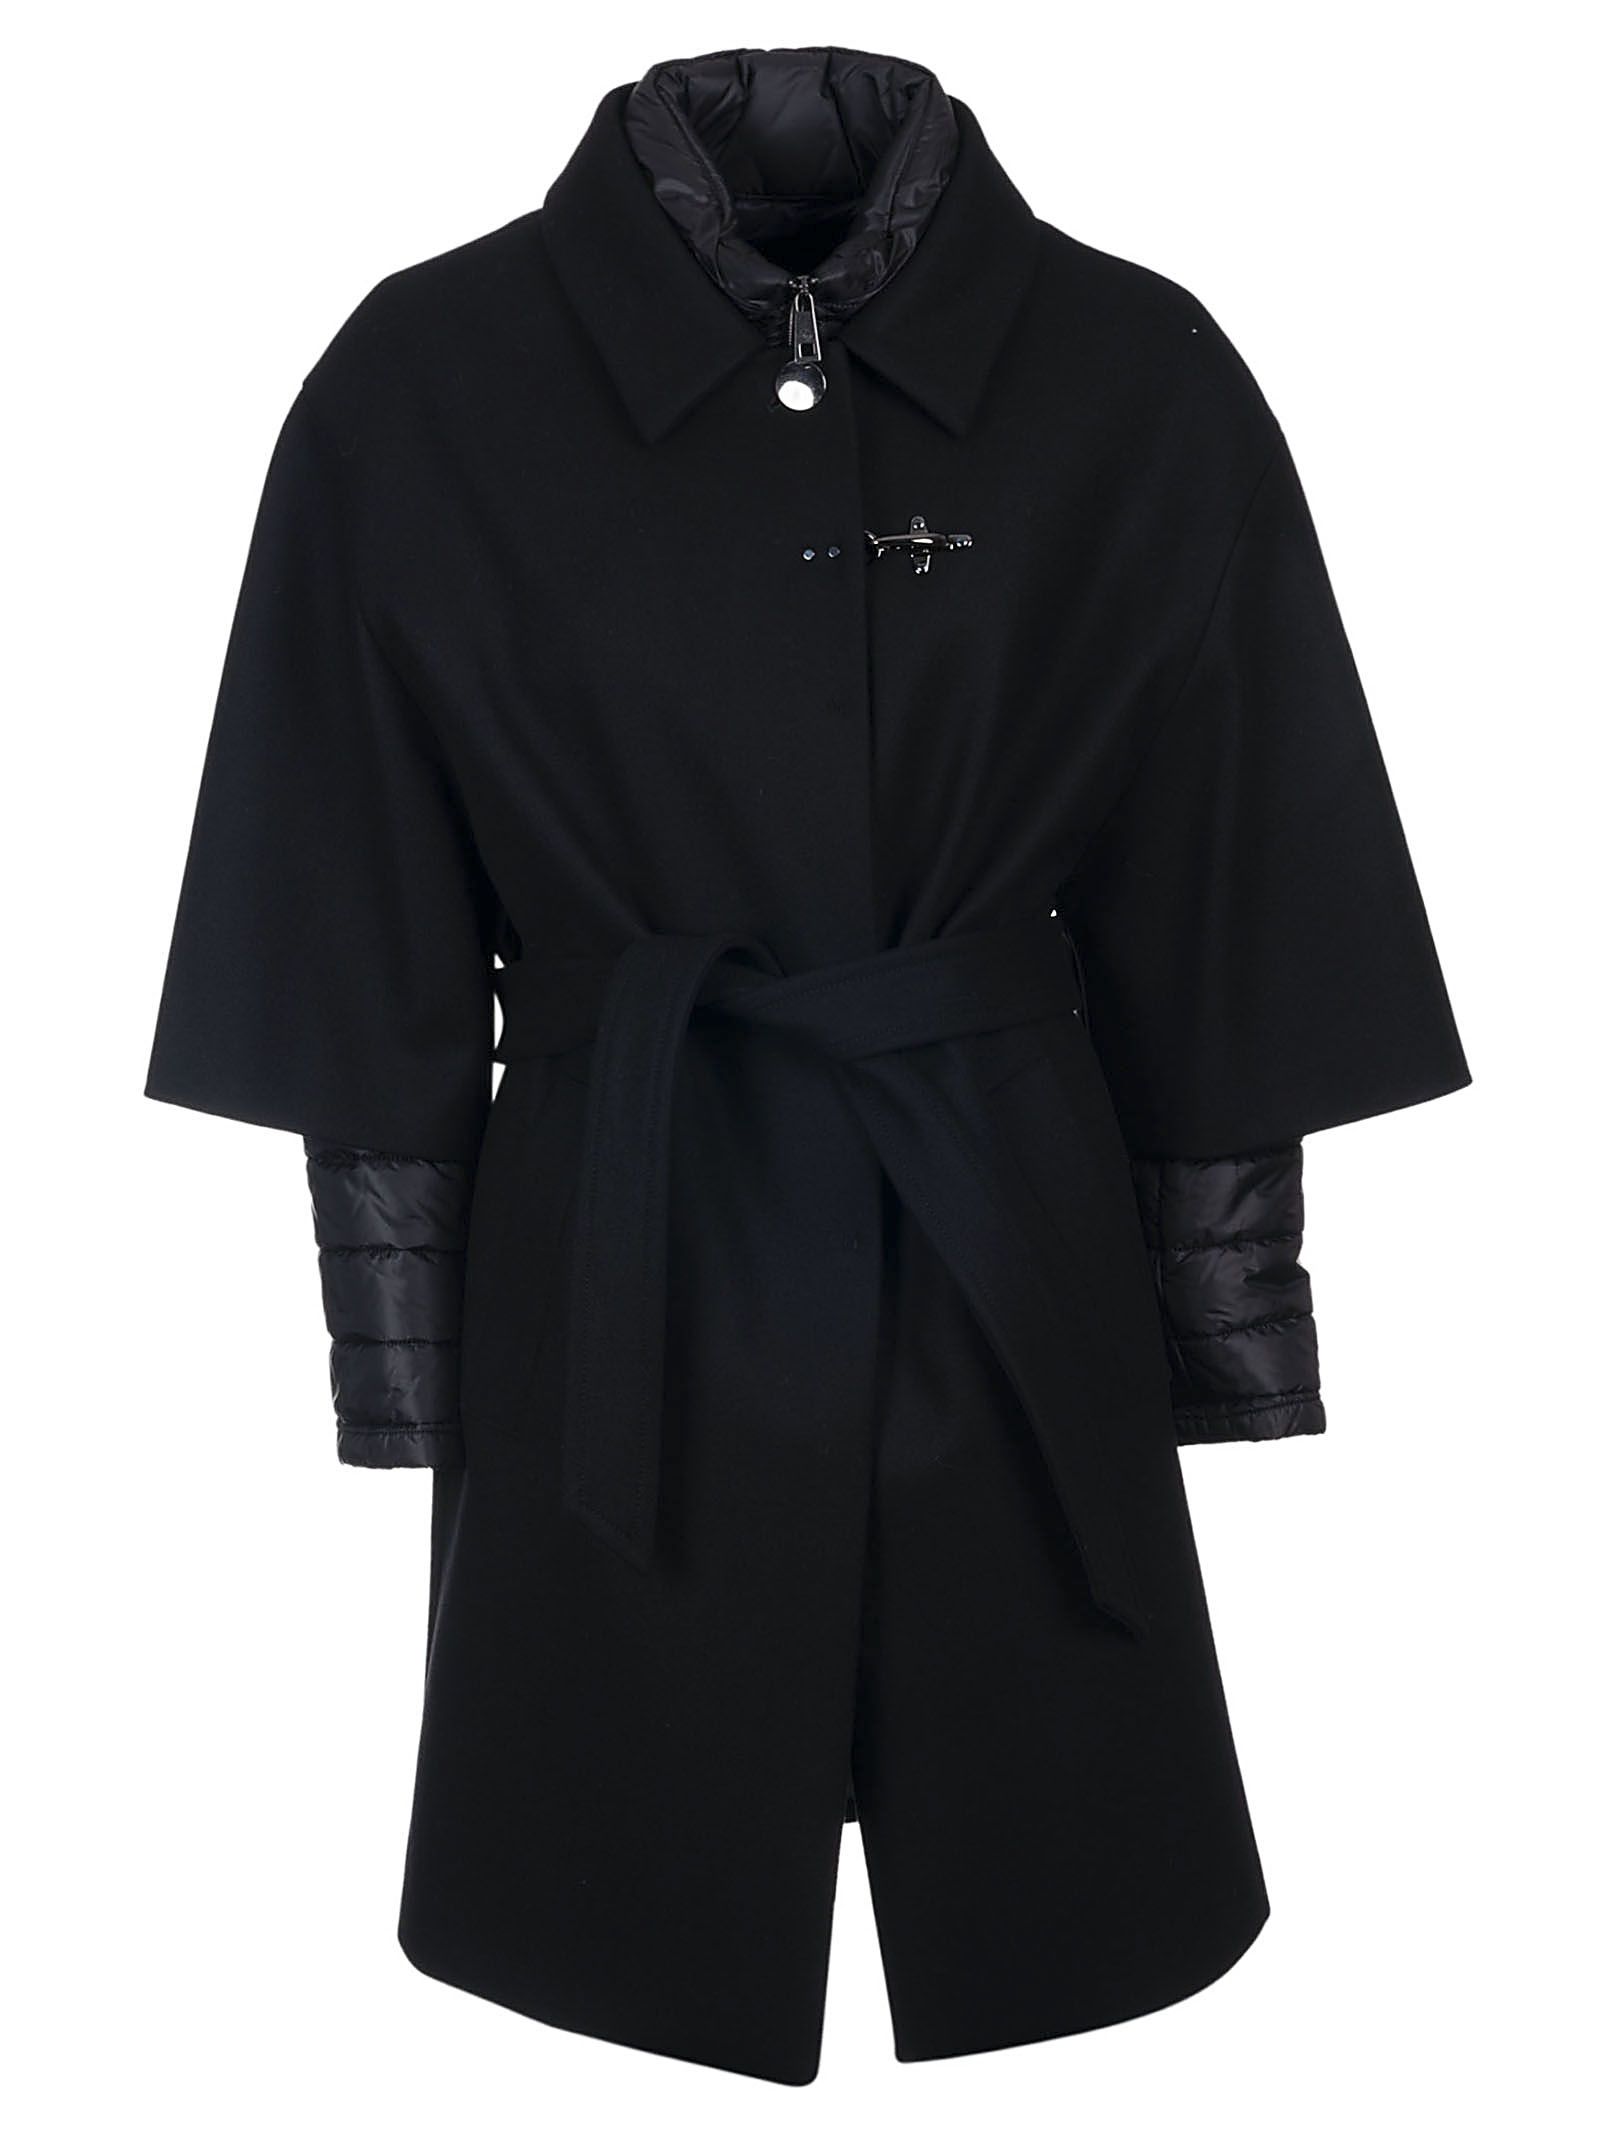 italist | Best price in the market for Fay Fay Layered Coat - B999 ...